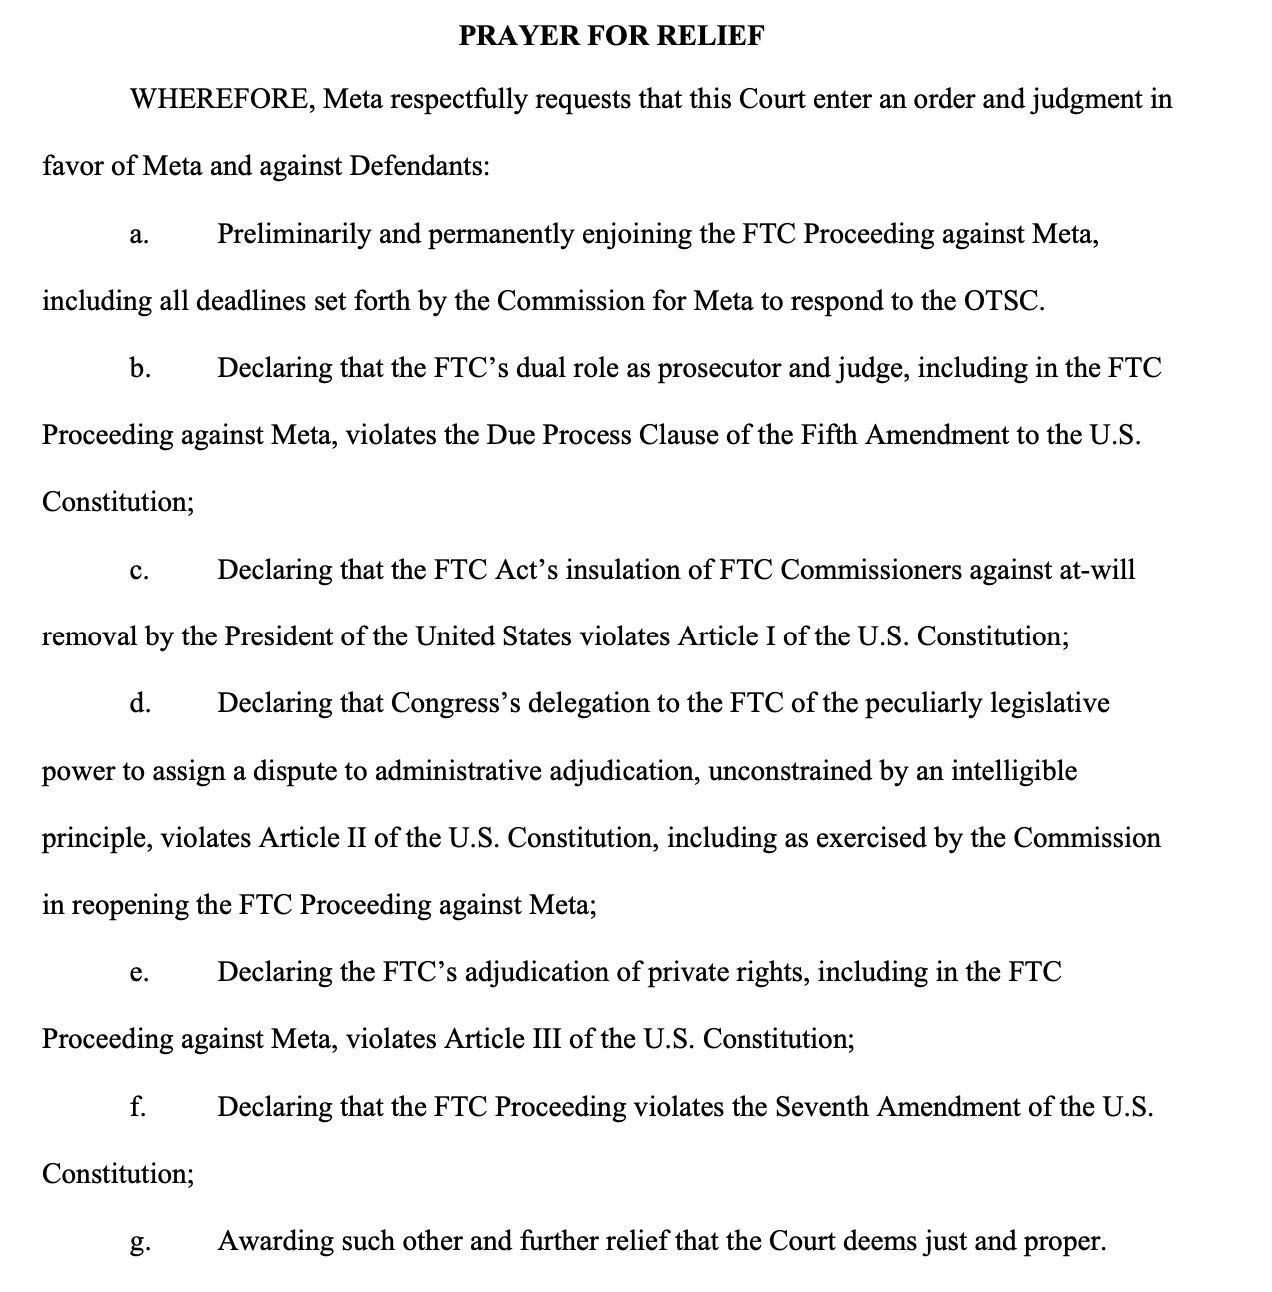 WHEREFORE, Meta respectfully requests that this Court enter an order and judgment in favor of Meta and against Defendants: a. Preliminarily and permanently enjoining the FTC Proceeding against Meta, including all deadlines set forth by the Commission for Meta to respond to the OTSC. b. Declaring that the FTC’s dual role as prosecutor and judge, including in the FTC Proceeding against Meta, violates the Due Process Clause of the Fifth Amendment to the U.S. Constitution; c. Declaring that the FTC Act’s insulation of FTC Commissioners against at-will removal by the President of the United States violates Article I of the U.S. Constitution; d. Declaring that Congress’s delegation to the FTC of the peculiarly legislative power to assign a dispute to administrative adjudication, unconstrained by an intelligible principle, violates Article II of the U.S. Constitution, including as exercised by the Commission in reopening the FTC Proceeding against Meta; e. Declaring the FTC’s adjudication of private rights, including in the FTC Proceeding against Meta, violates Article III of the U.S. Constitution; f. Declaring that the FTC Proceeding violates the Seventh Amendment of the U.S. Constitution; g. Awarding such other and further relief that the Court deems just and proper. 